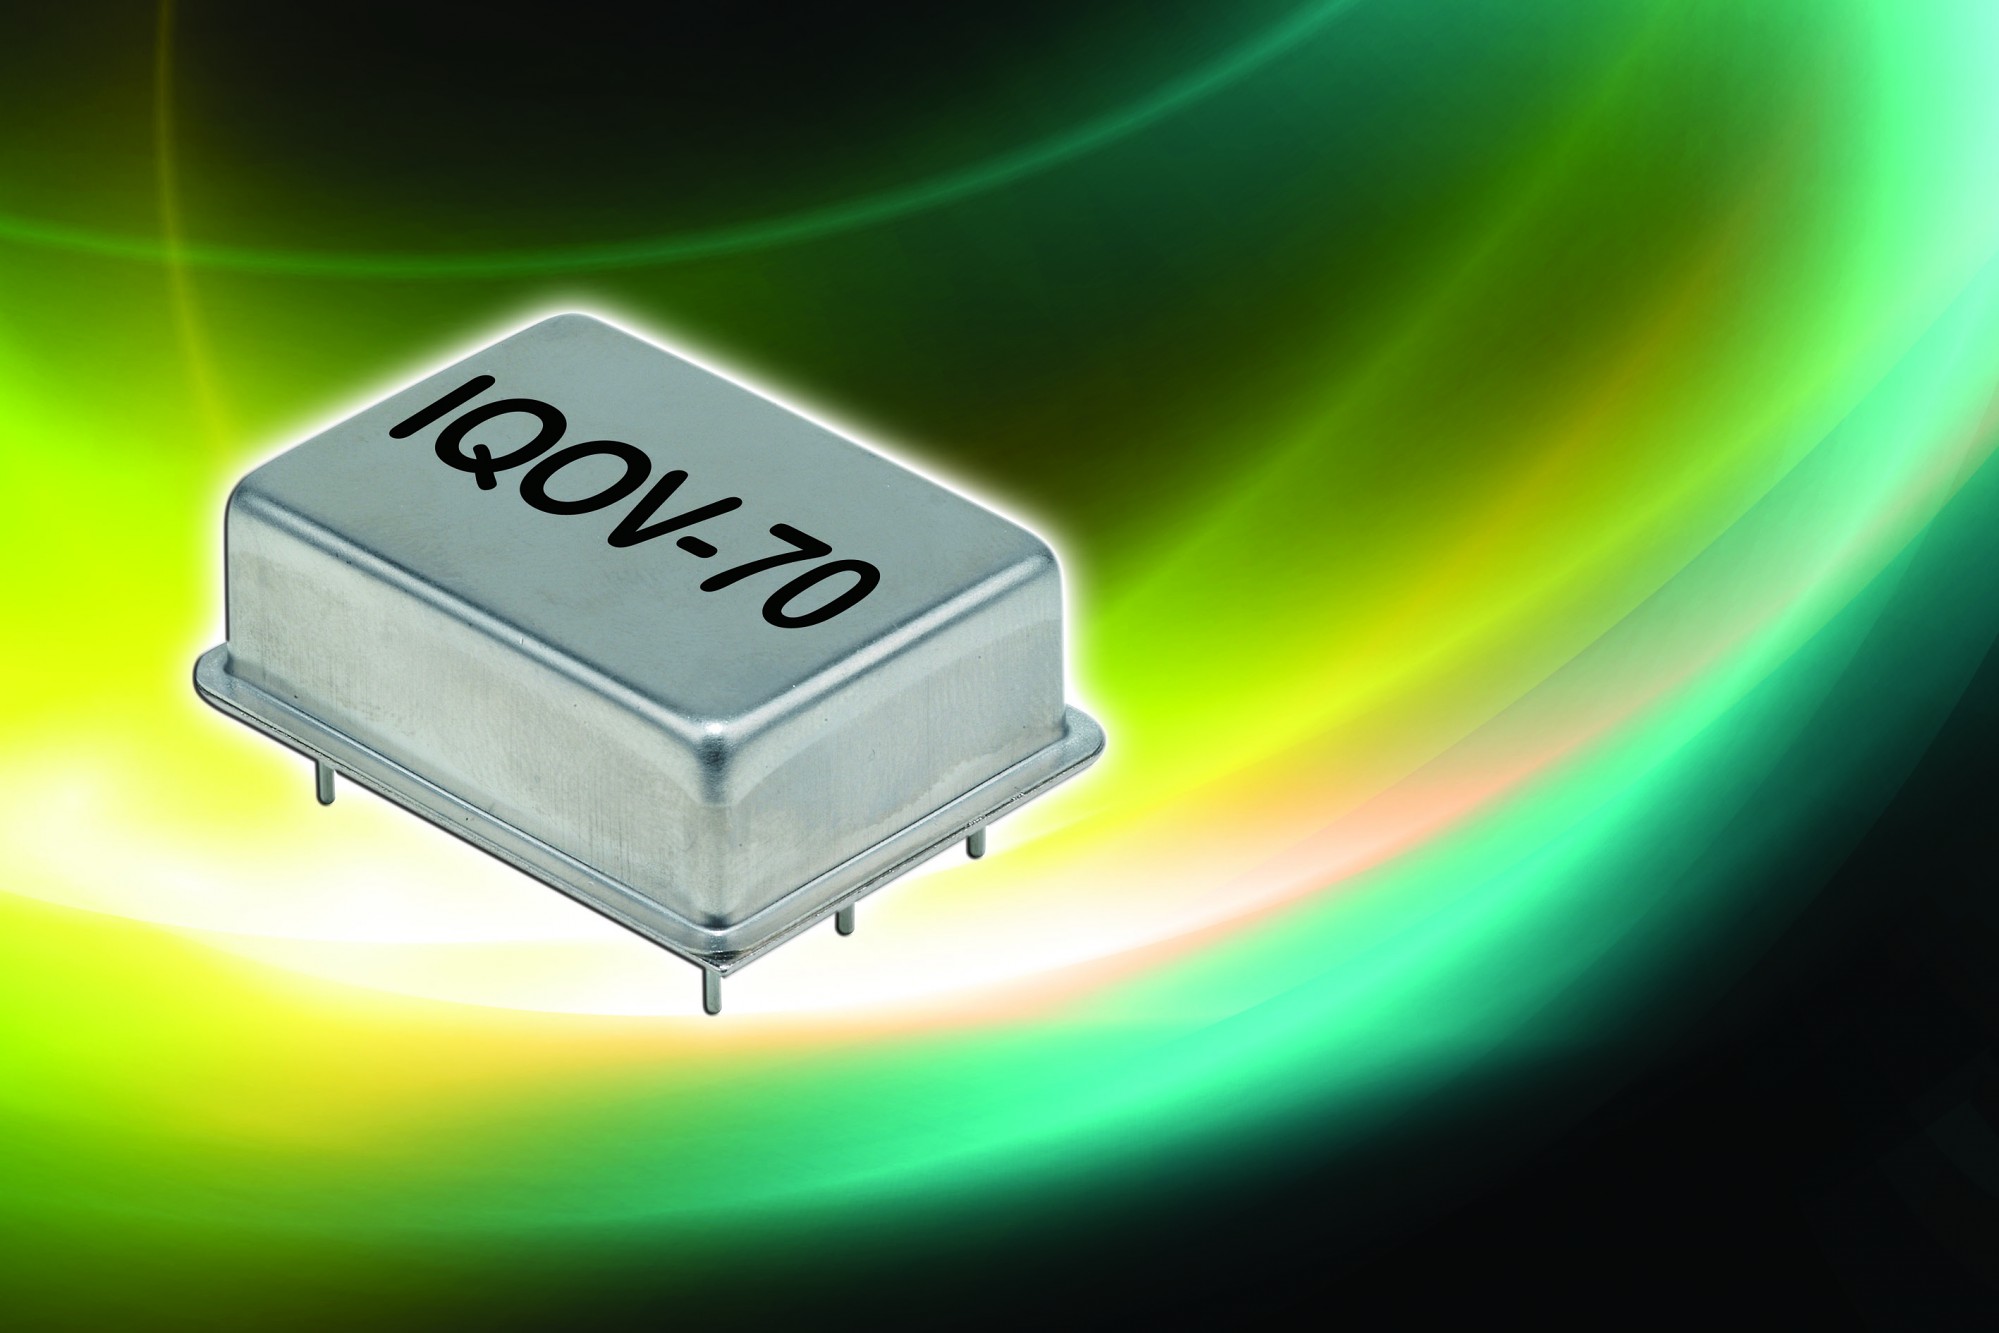 IQD launches new ultra high stability OCXO at Embedded World 2013